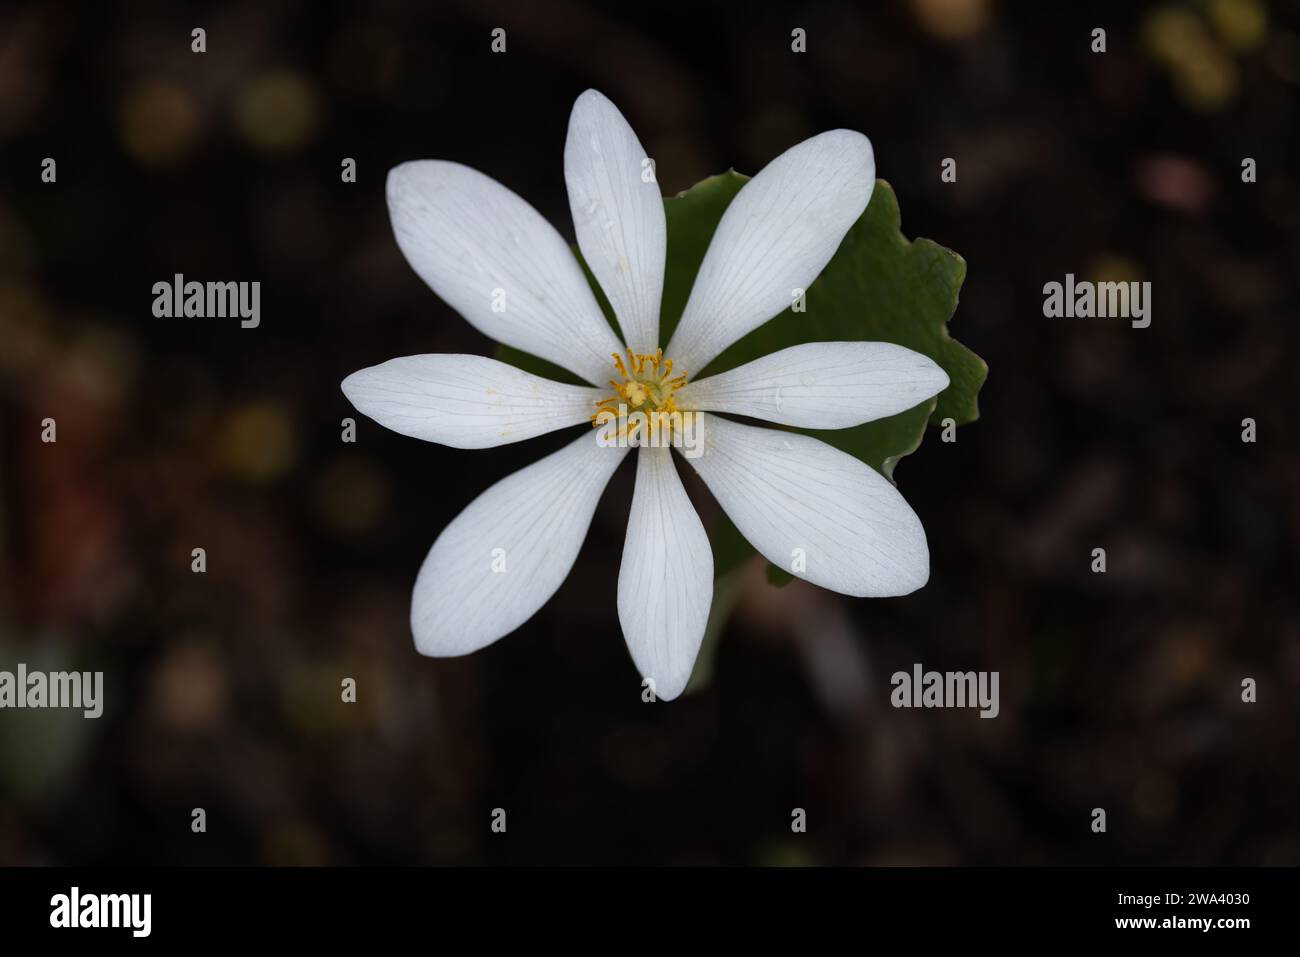 Macro image of a Bloodroot (Sanguinaria canadensis) flower. Stock Photo